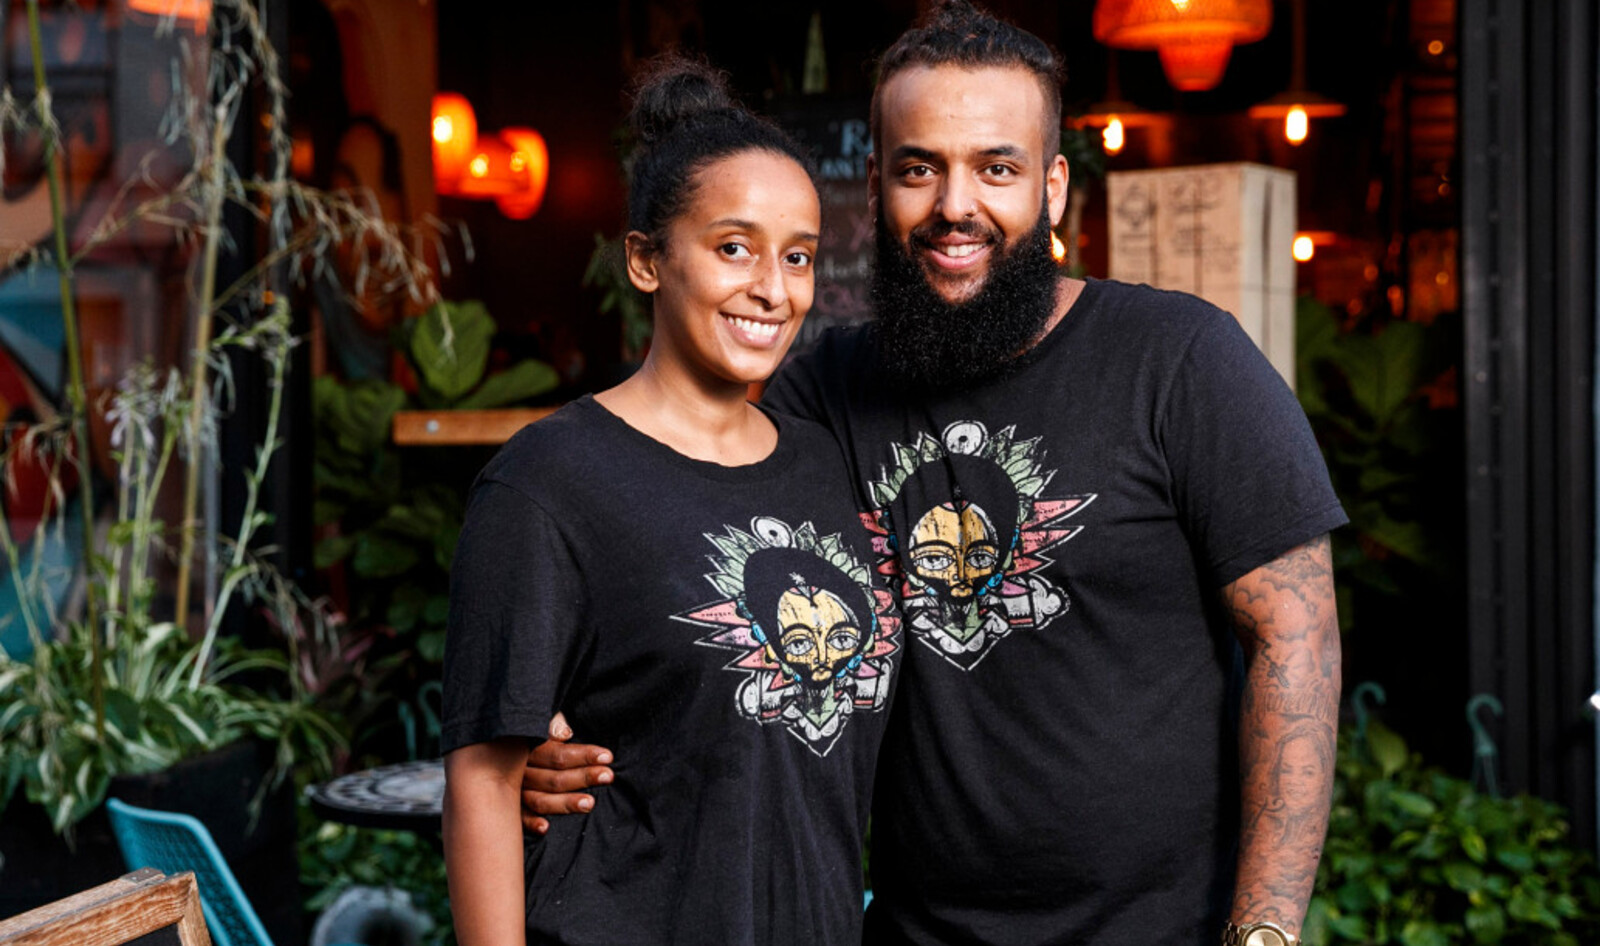 This Brooklyn Vegan Restaurant Opened 2 Weeks Before the Pandemic. Now, They're Booming.&nbsp;